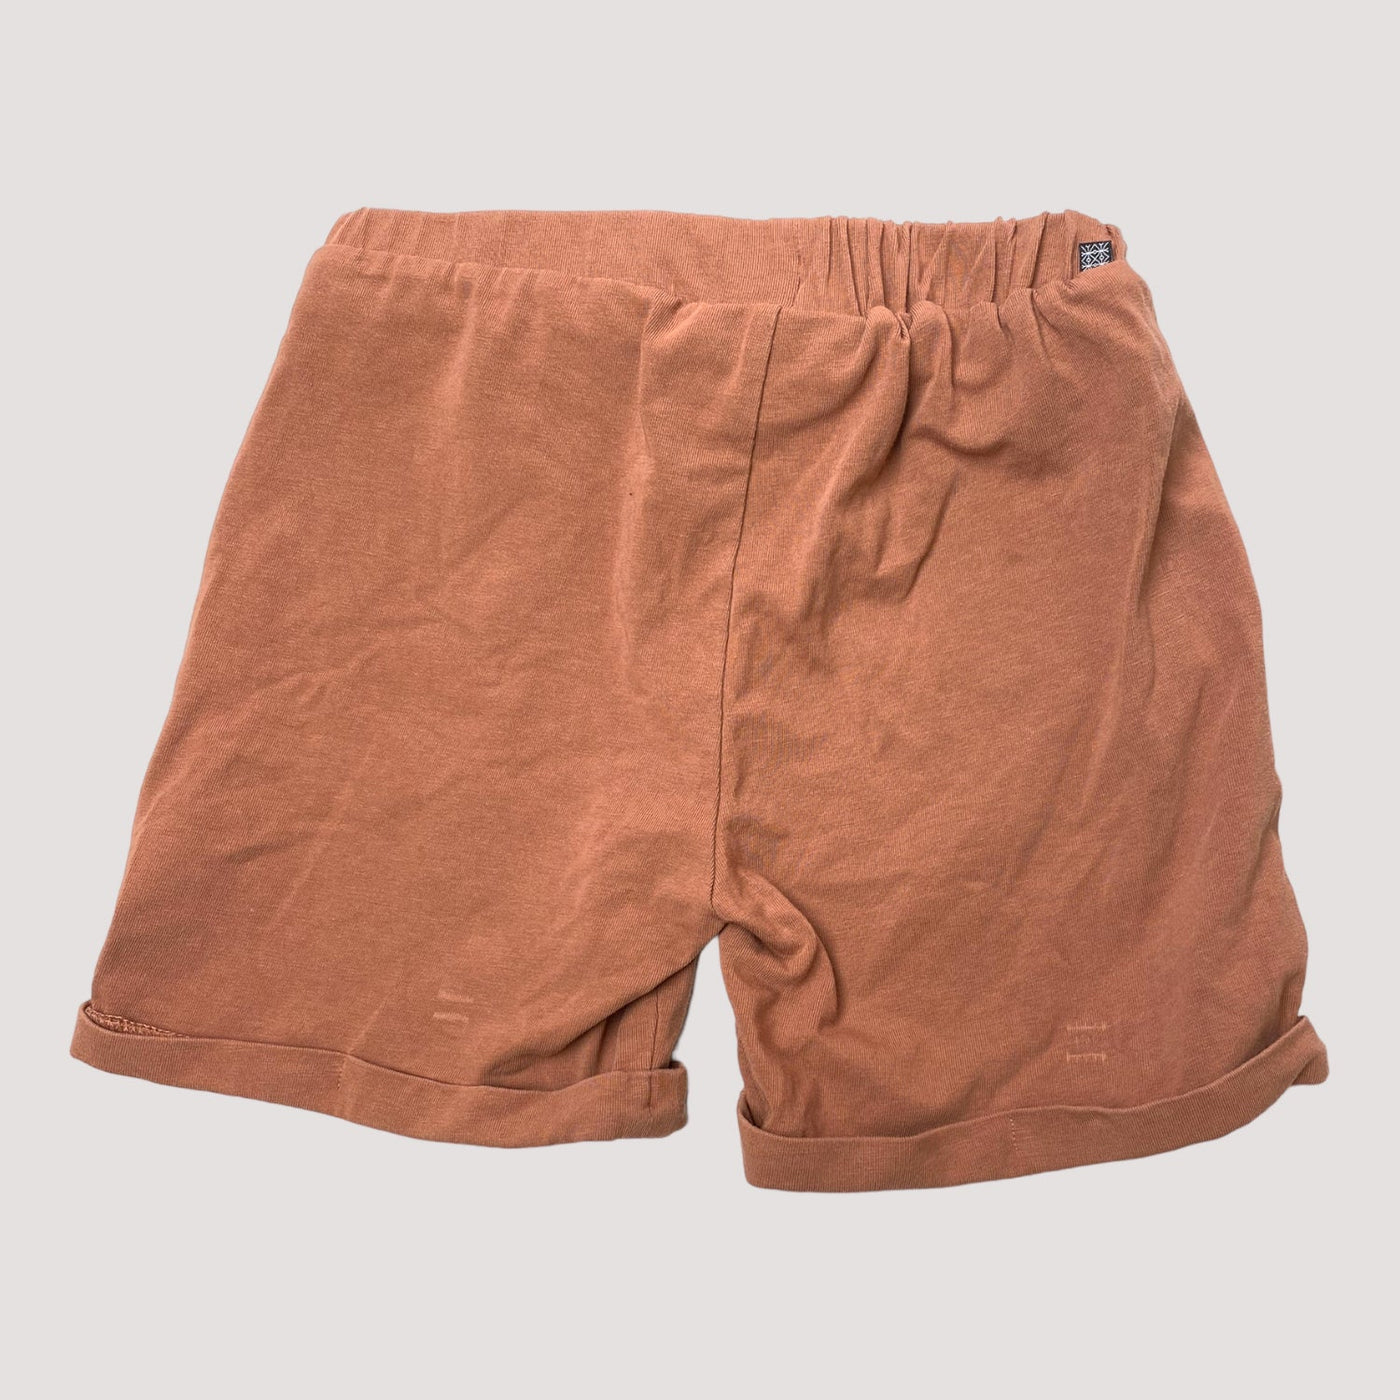 tricot shorts, brown | 122/128cm